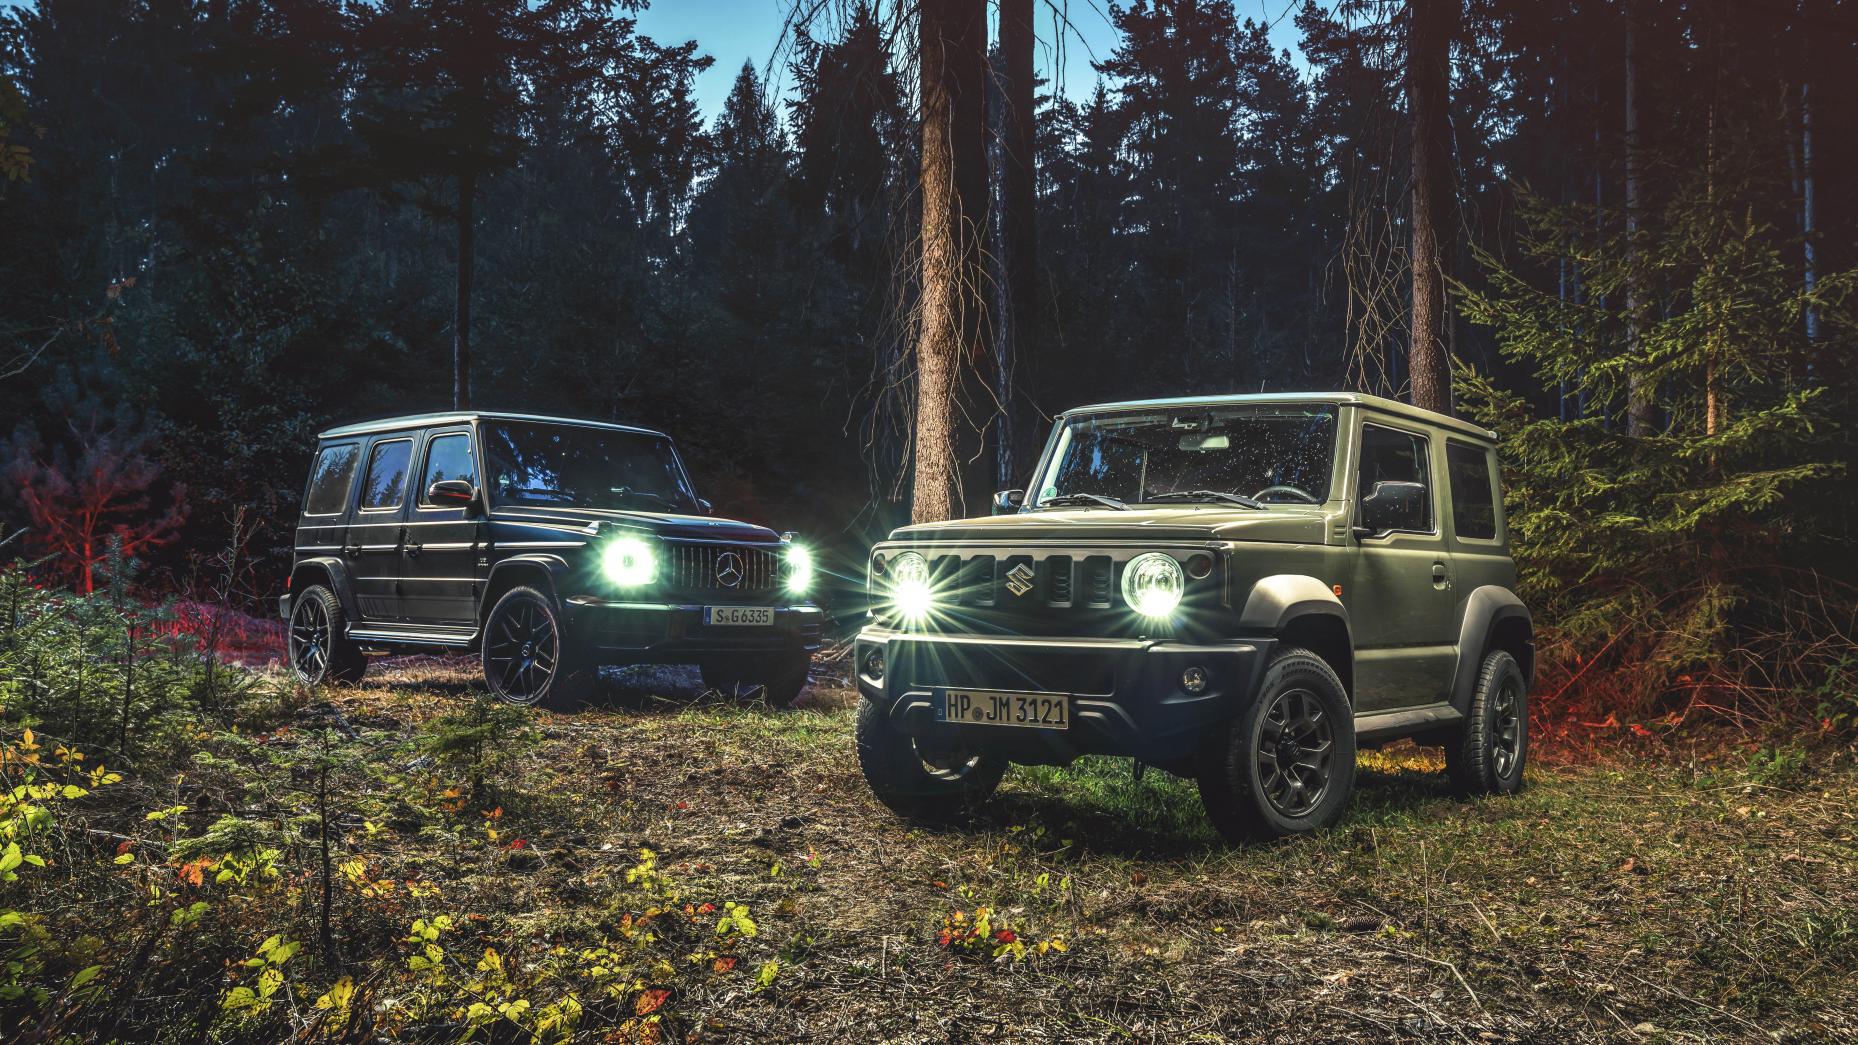 Mercedes-AMG G63 and Suzuki Jimny: TG mag's Apocalypse Survival Tools of the Year